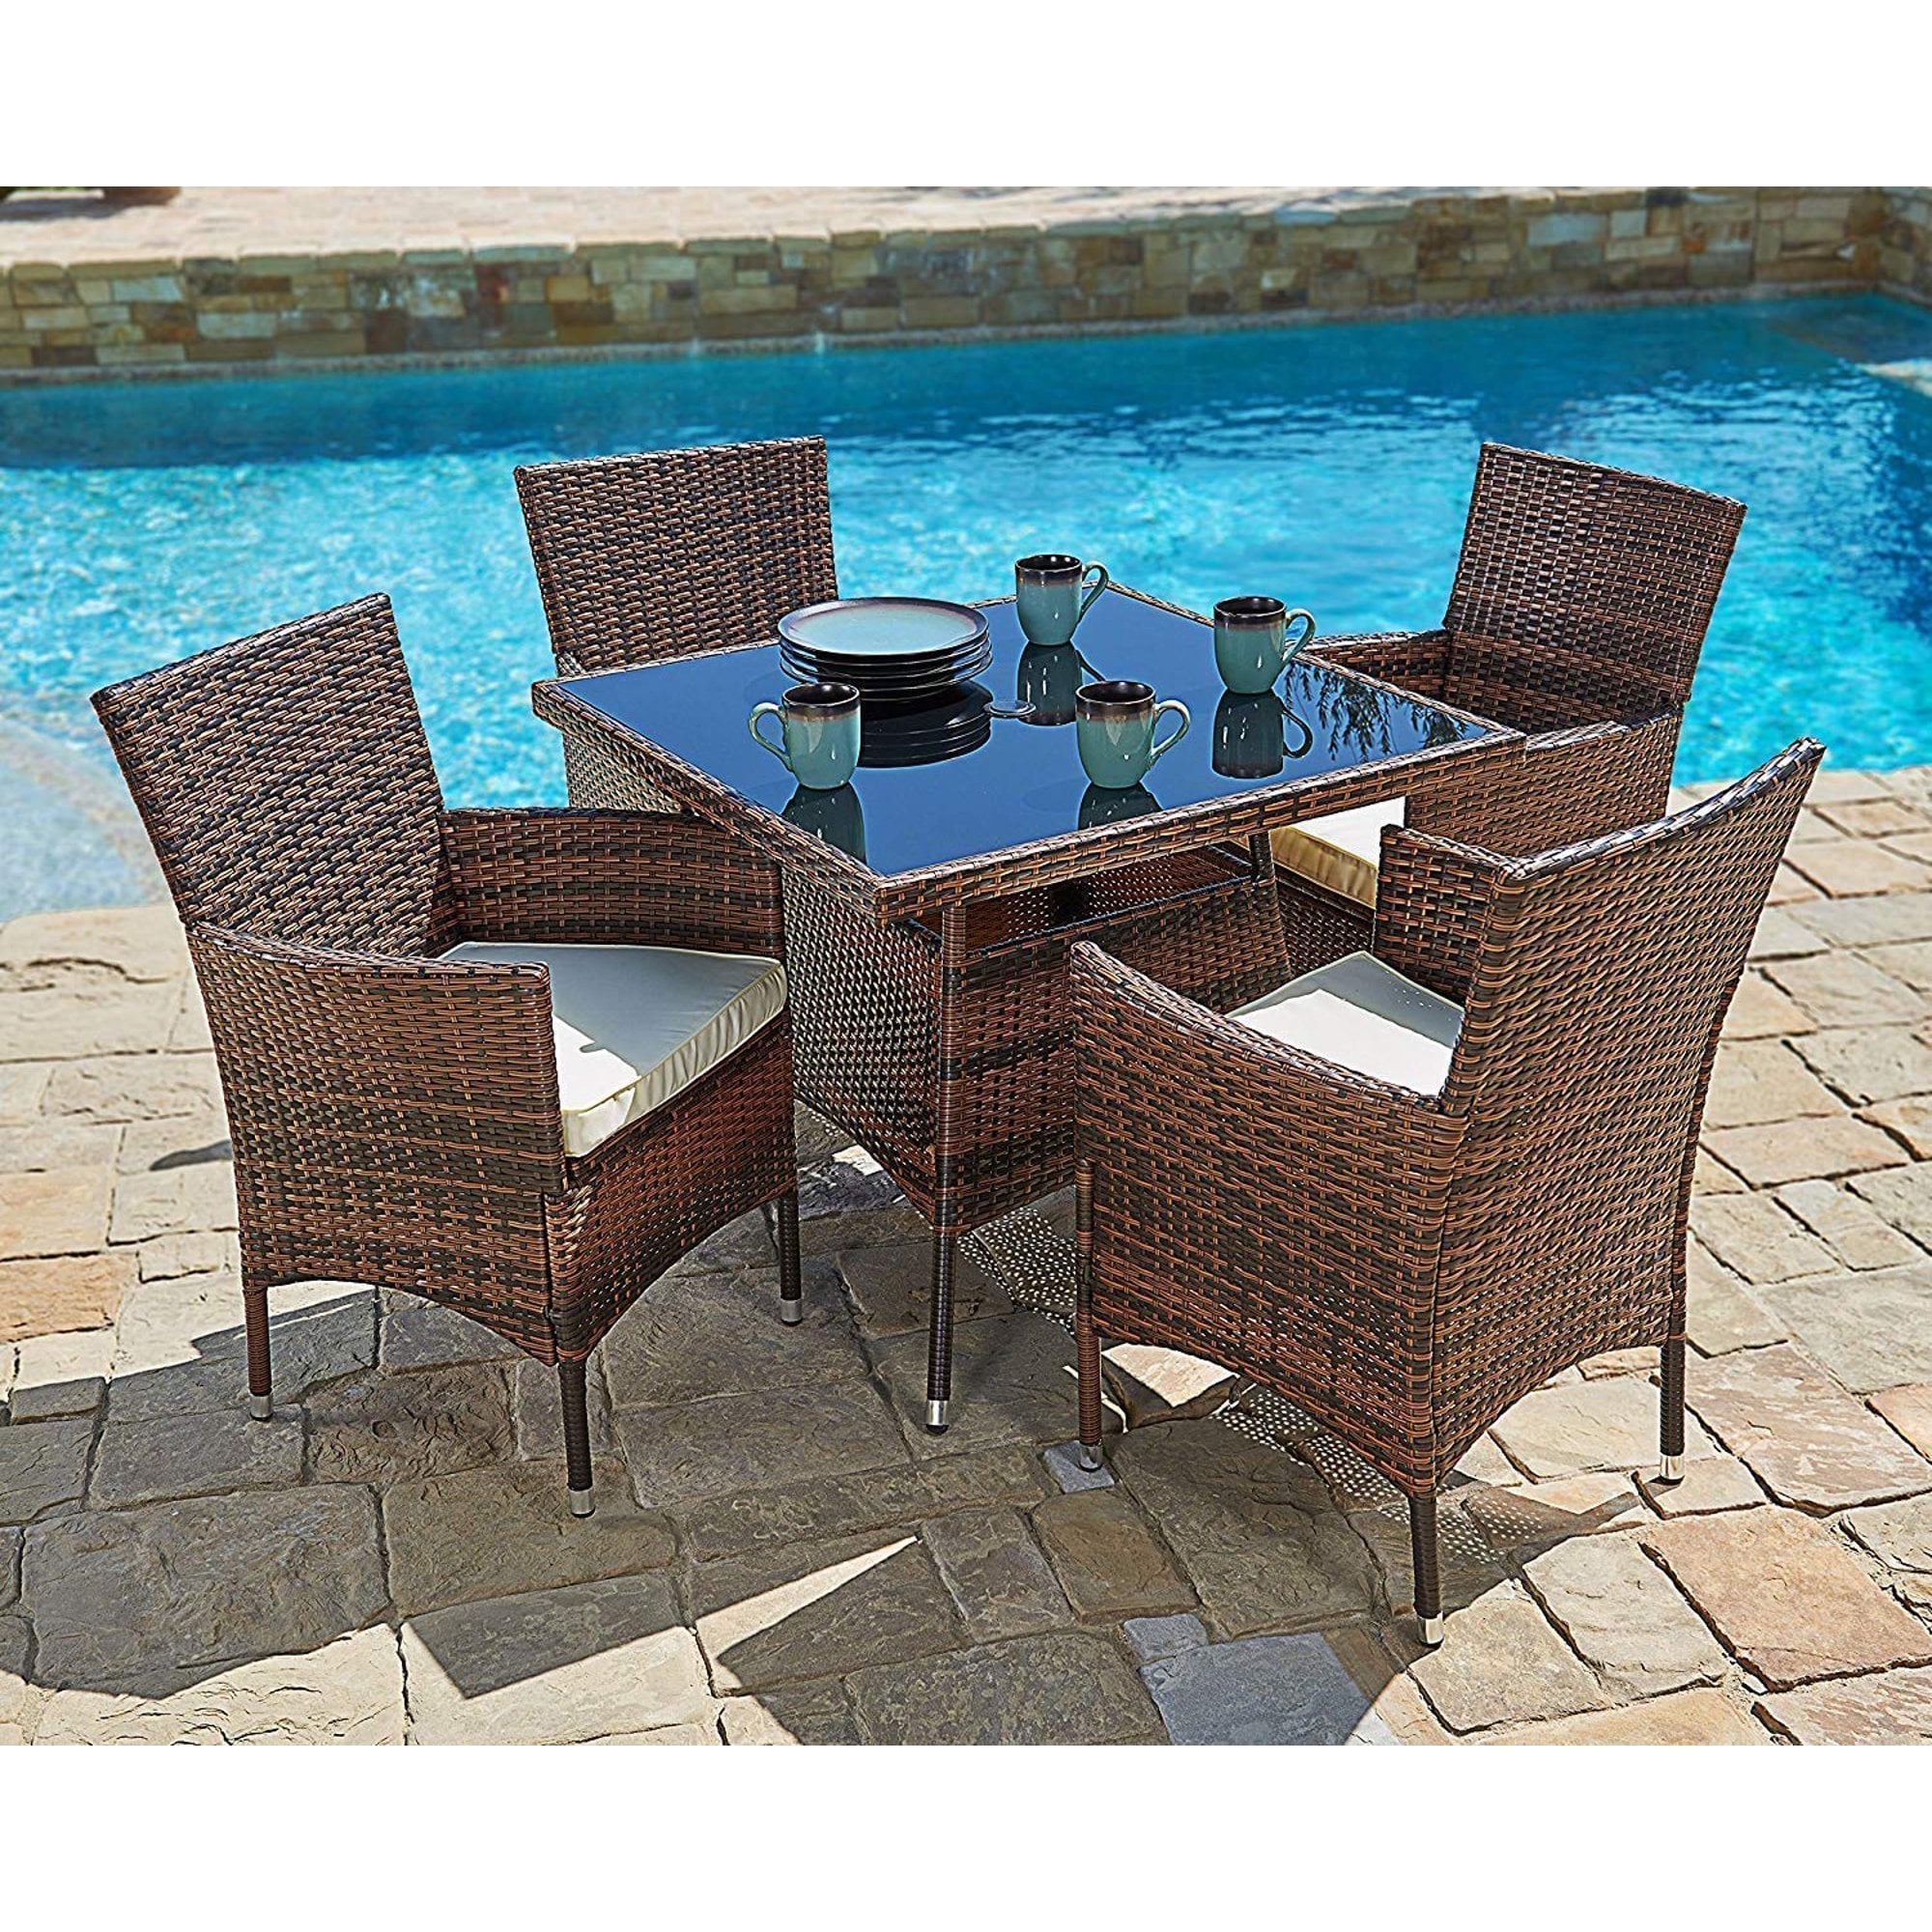 Suncrown Outdoor Dining Set Not All Patio Furniture Has To throughout dimensions 2000 X 2000